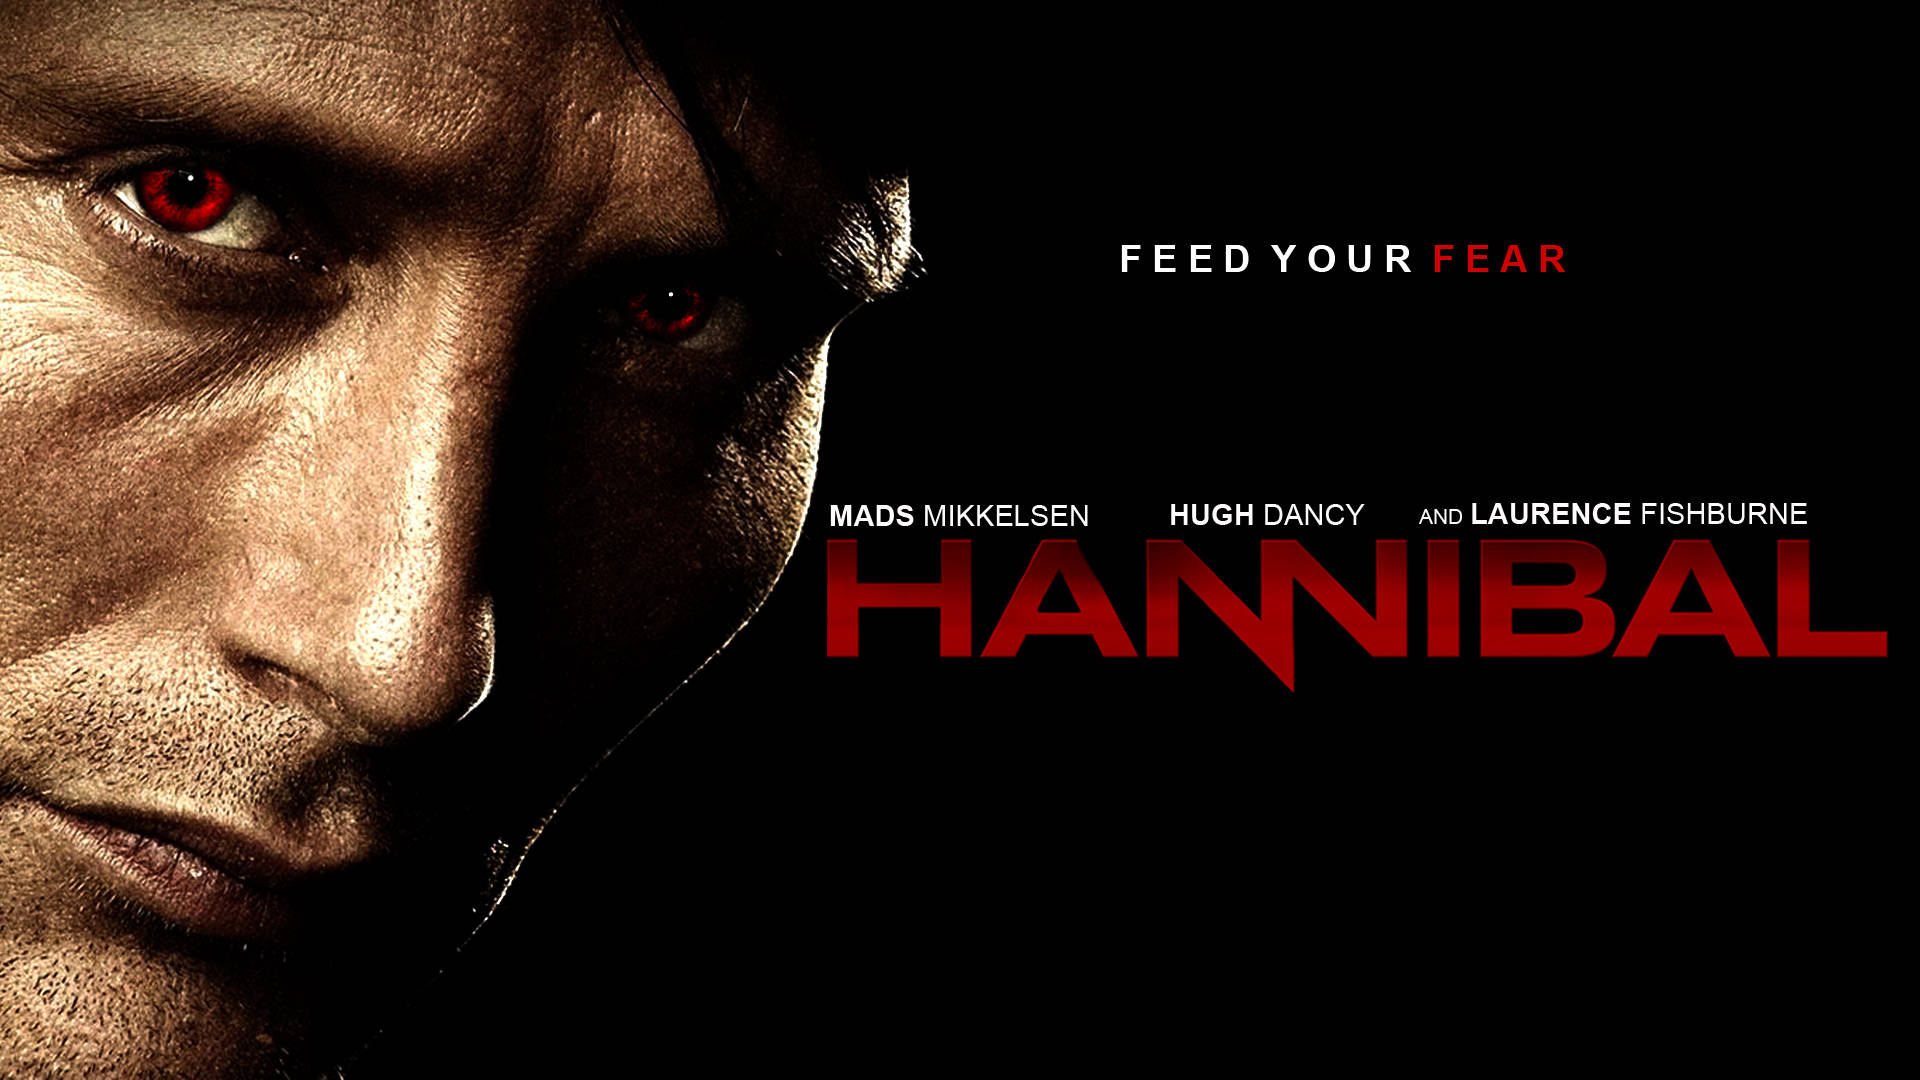 Hannibal Feed Your Fear Background